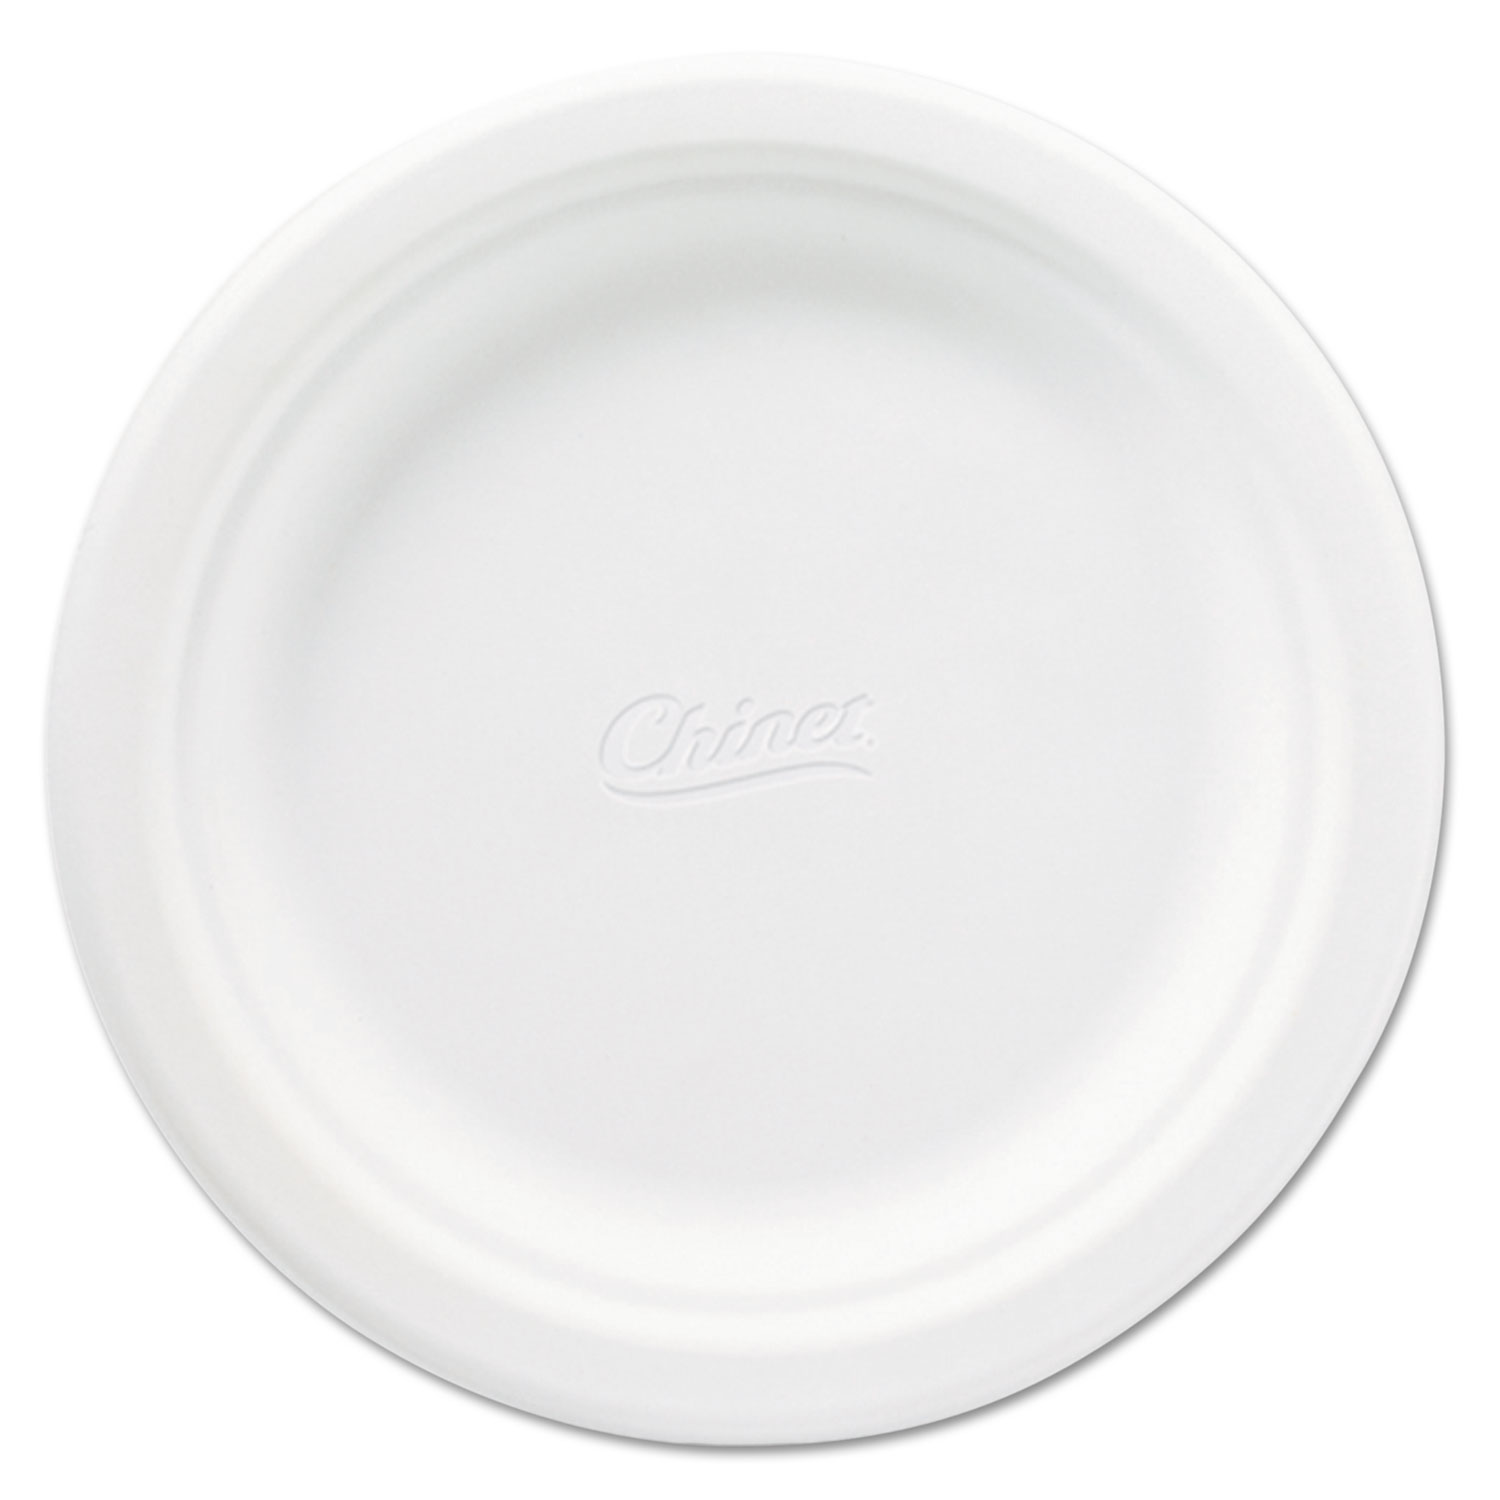  Chinet 21226 Classic Paper Plates, 6 3/4 Inches, White, Round, 125/Pack (HUH21226CT) 